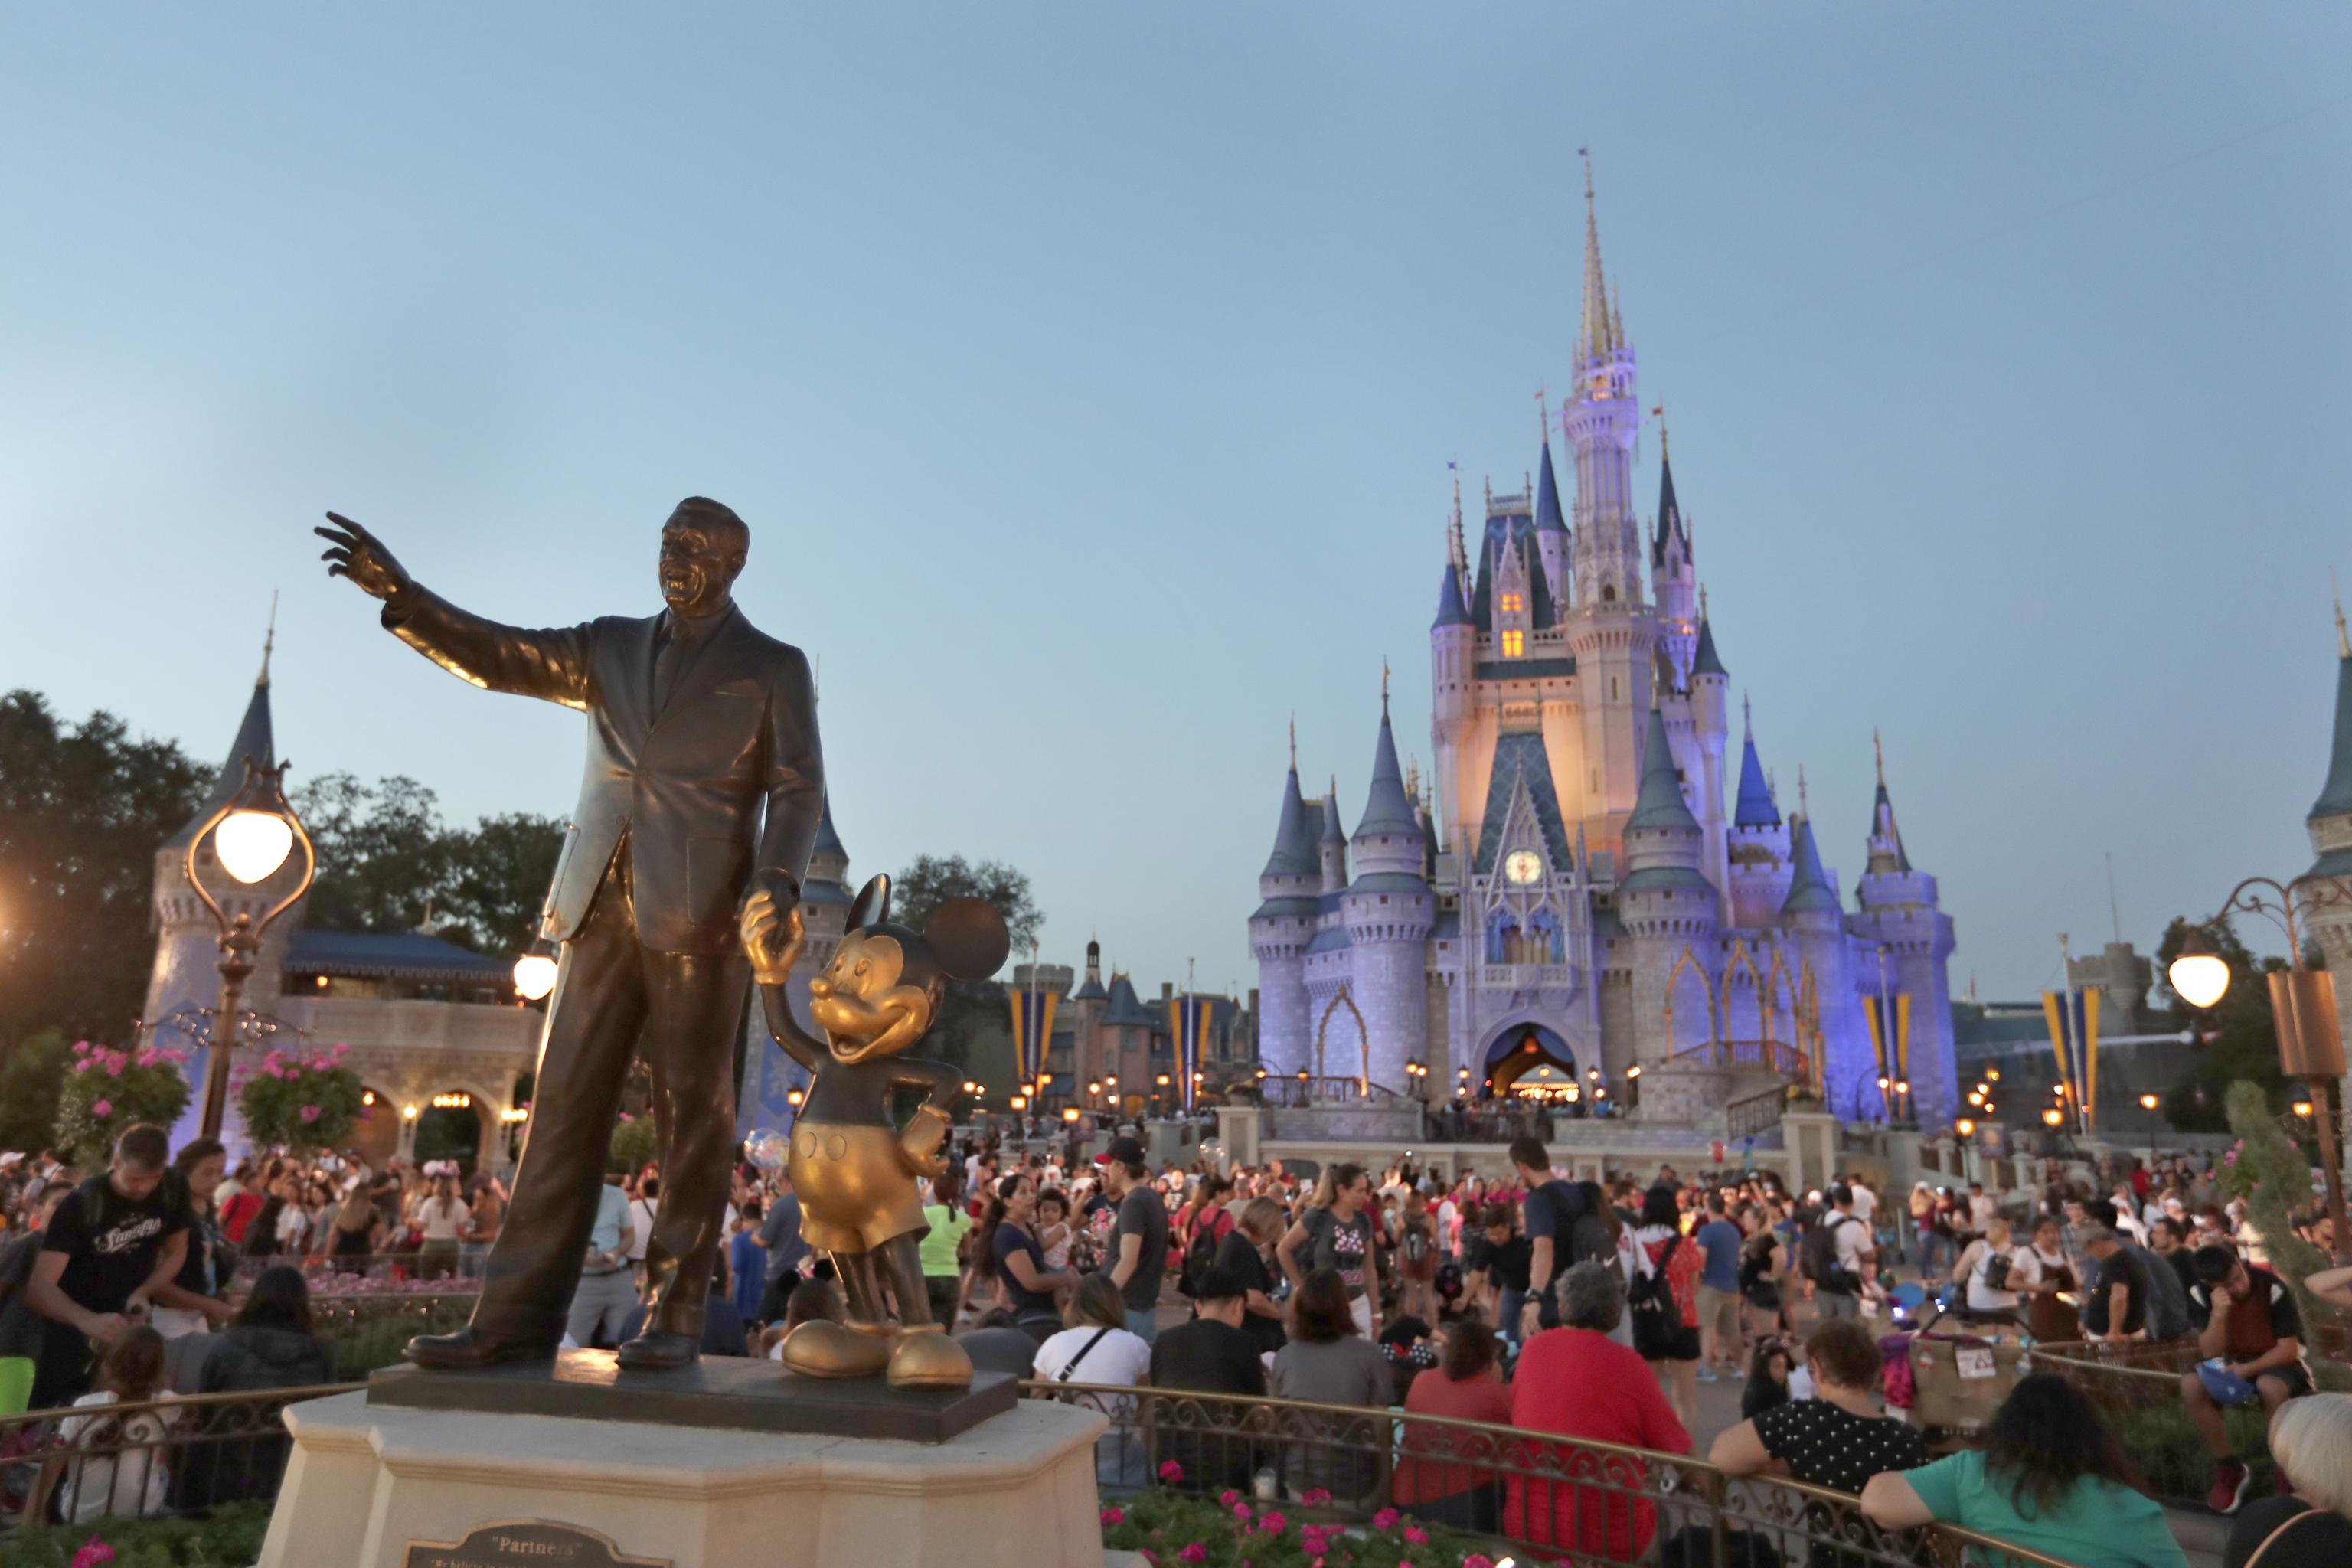 35 Best Photos Nba Disney World Hotels - Nba Teams Assigned To Walt Disney World Resorts Based On Tournament Seeds Laughingplace Com